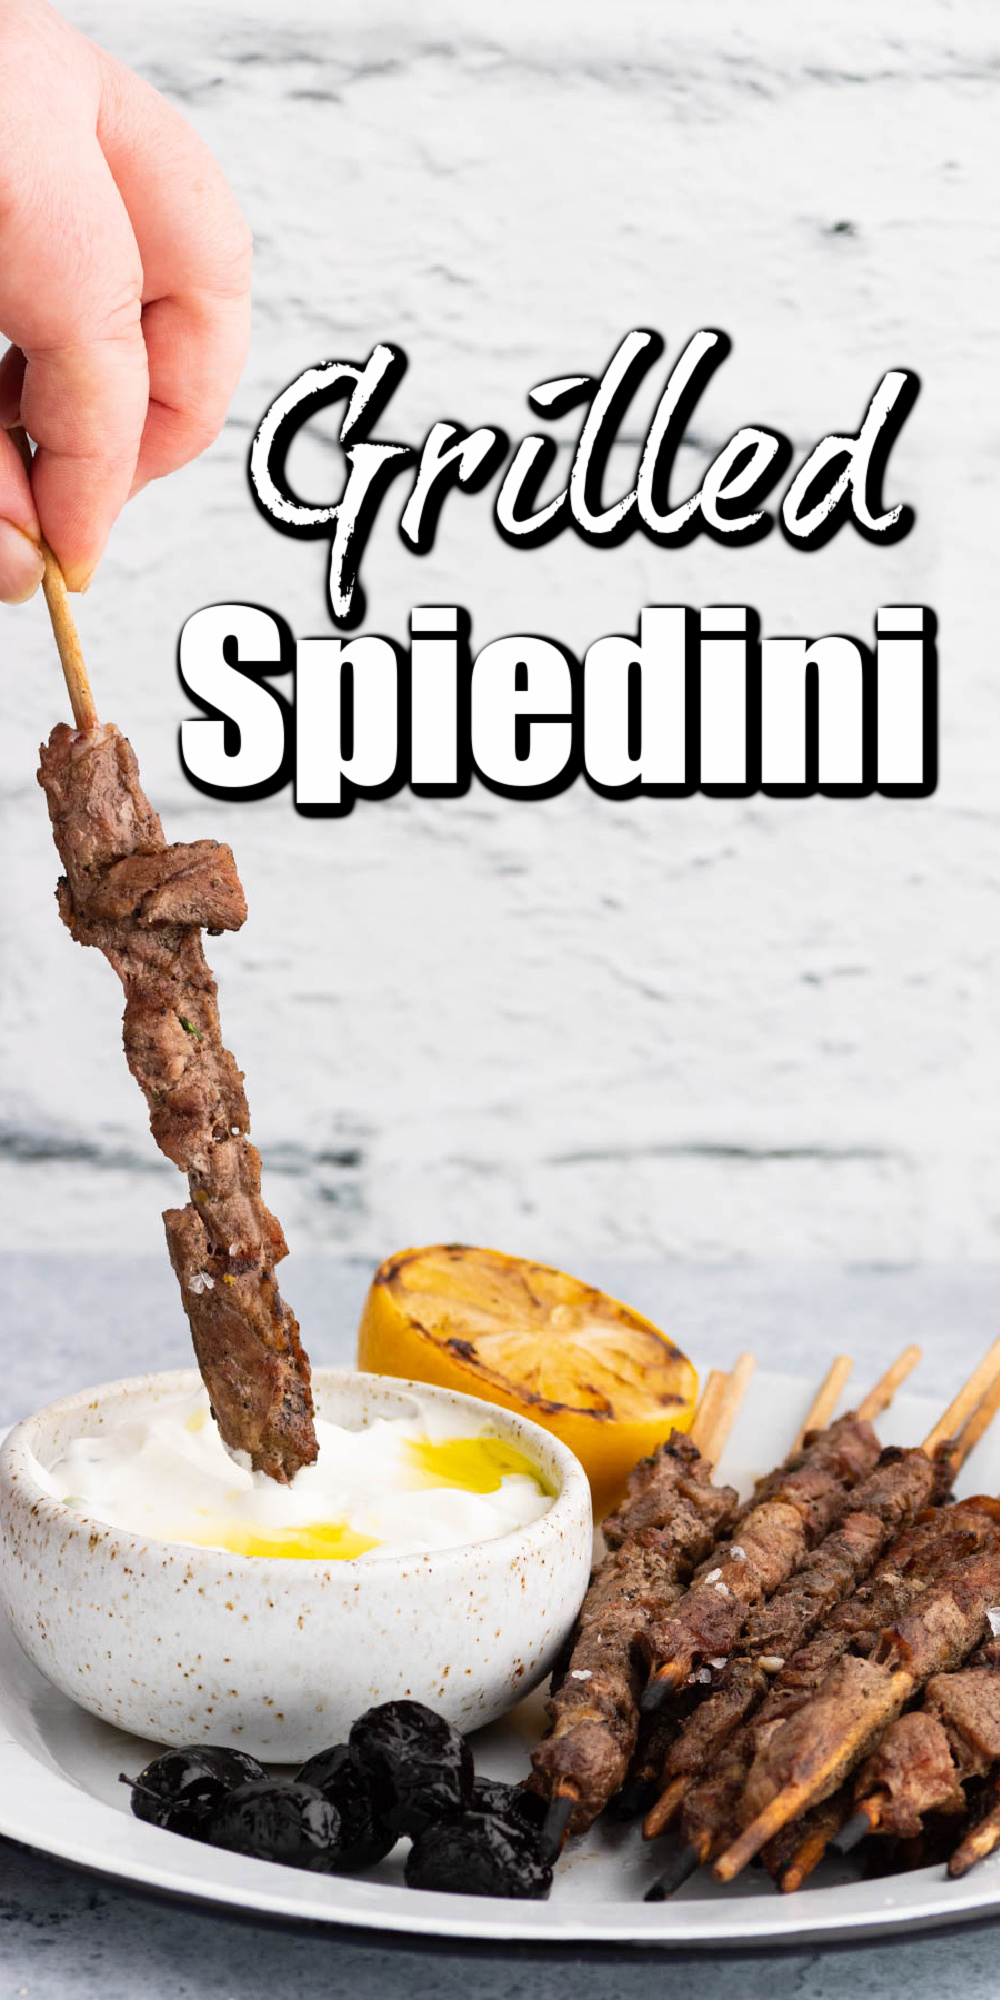 Grilled Spiedini is a quick, easy dinner or appetizer that tastes amazing!